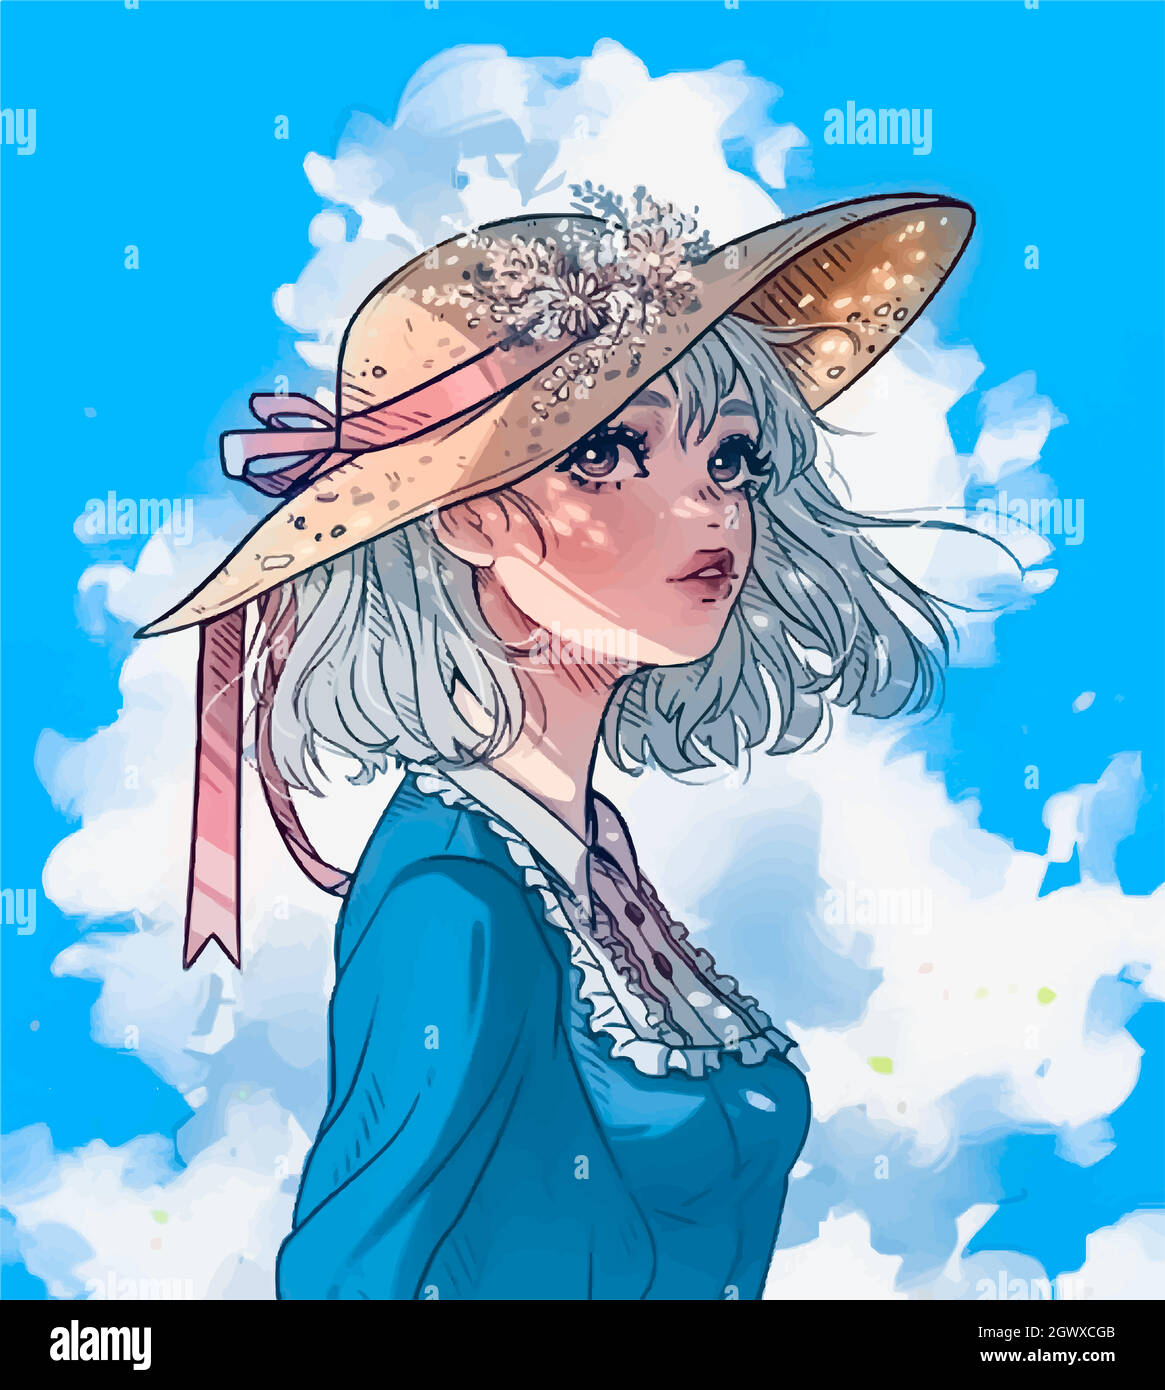 anime girl in a blue dress and hat with flowers against the sky Stock Vector